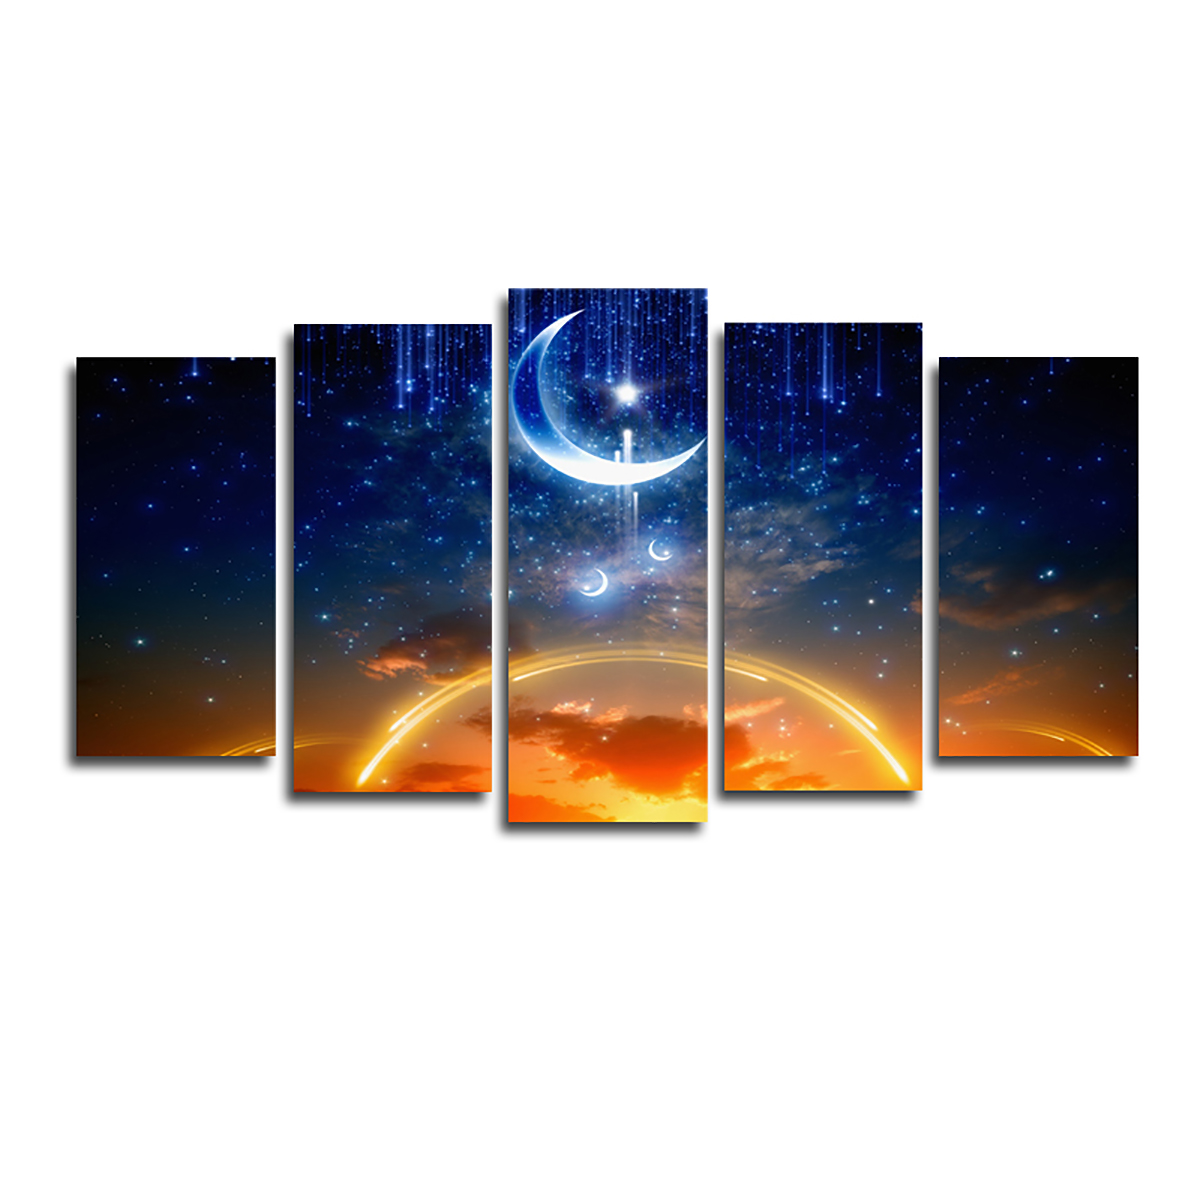 5Pcs-Canvas-Print-Paintings-Scenery-Oil-Painting-Wall-Decorative-Printing-Art-Picture-Frameless-Home-1758668-15